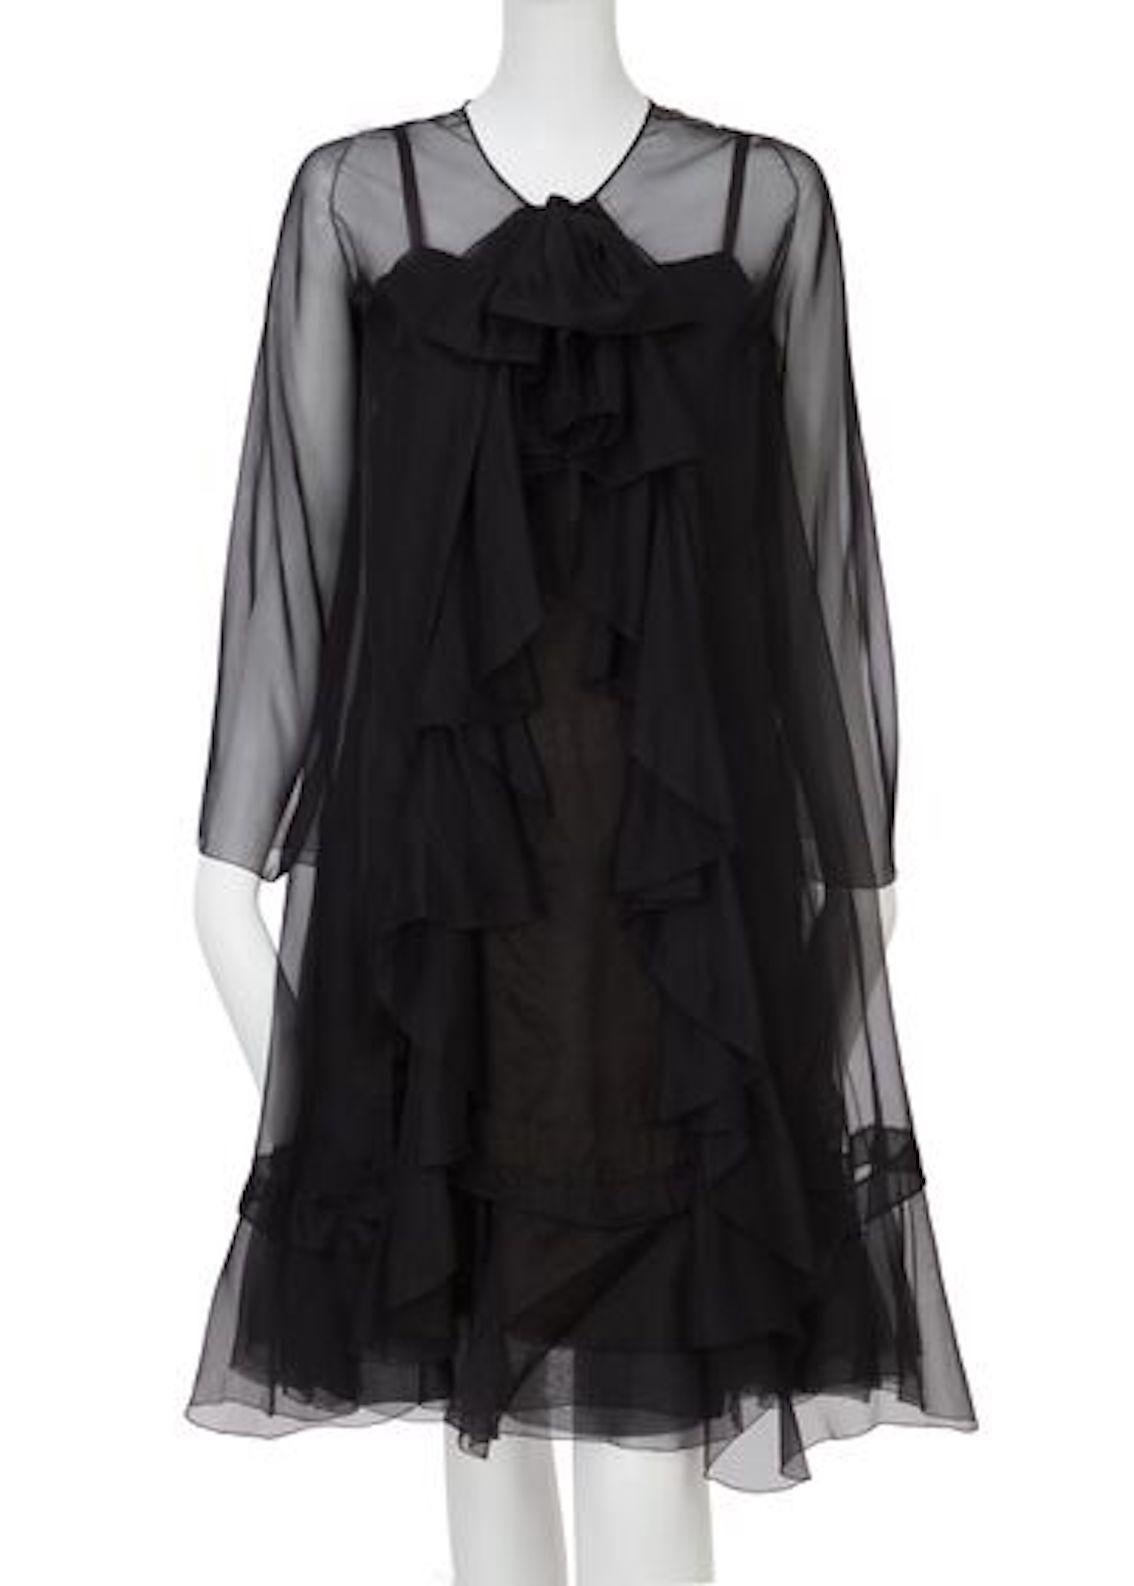 Haute Couture Spring/Summer 1966, black silk chiffon dress with spaghetti straps and long sleeved jacket with ruffle detail to the front.

